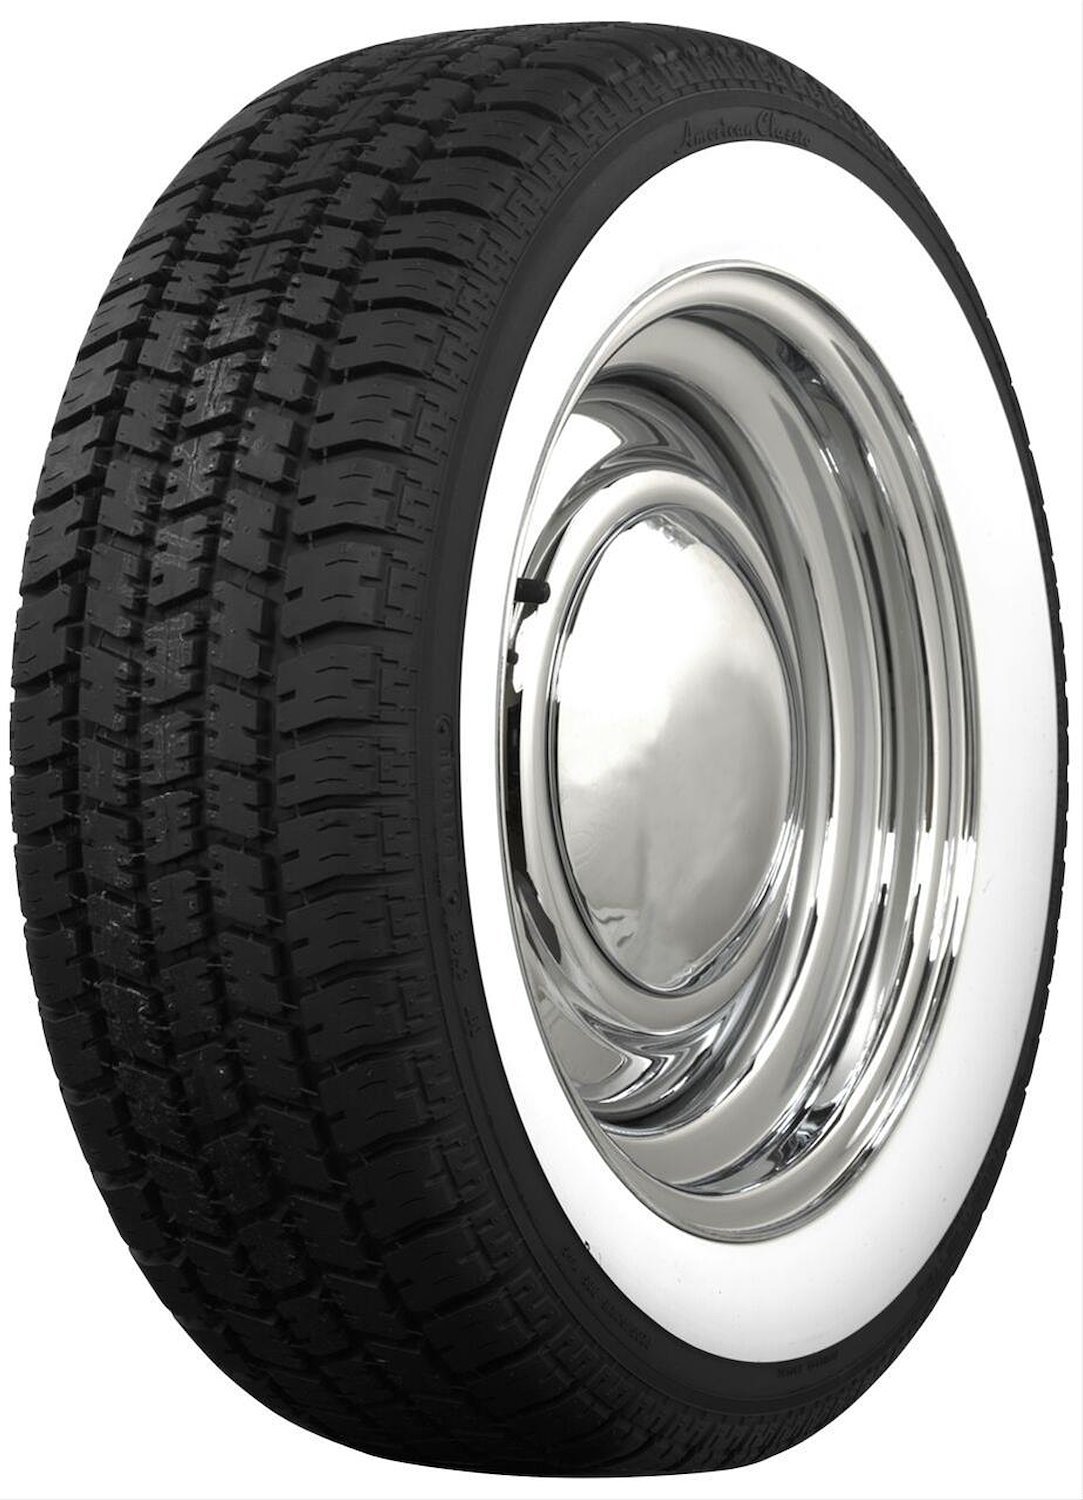 579817 Tire, American Classic Radial, 2.25-Inch Whitewall, 165R15